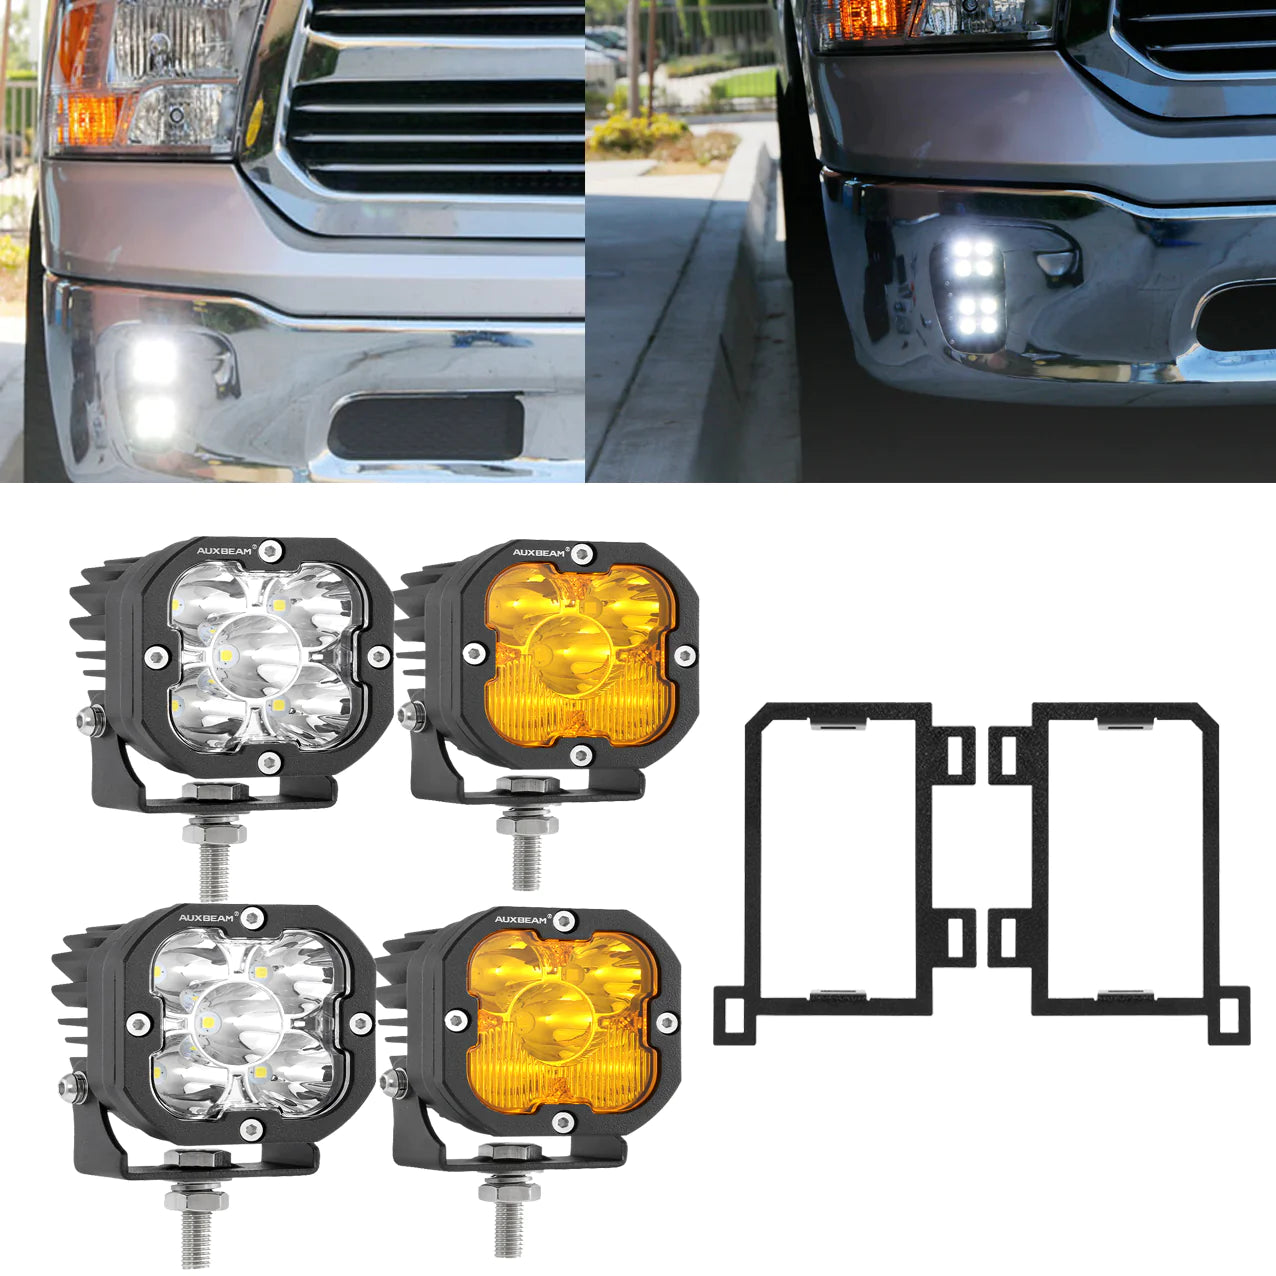 Auxbeam 3 Inch LED Pods Lights with Additional Amber Covers & Fog Lamp Mounting Brackets (Vertical Fog Lamp) for Dodge Ram 1500 2013-2018